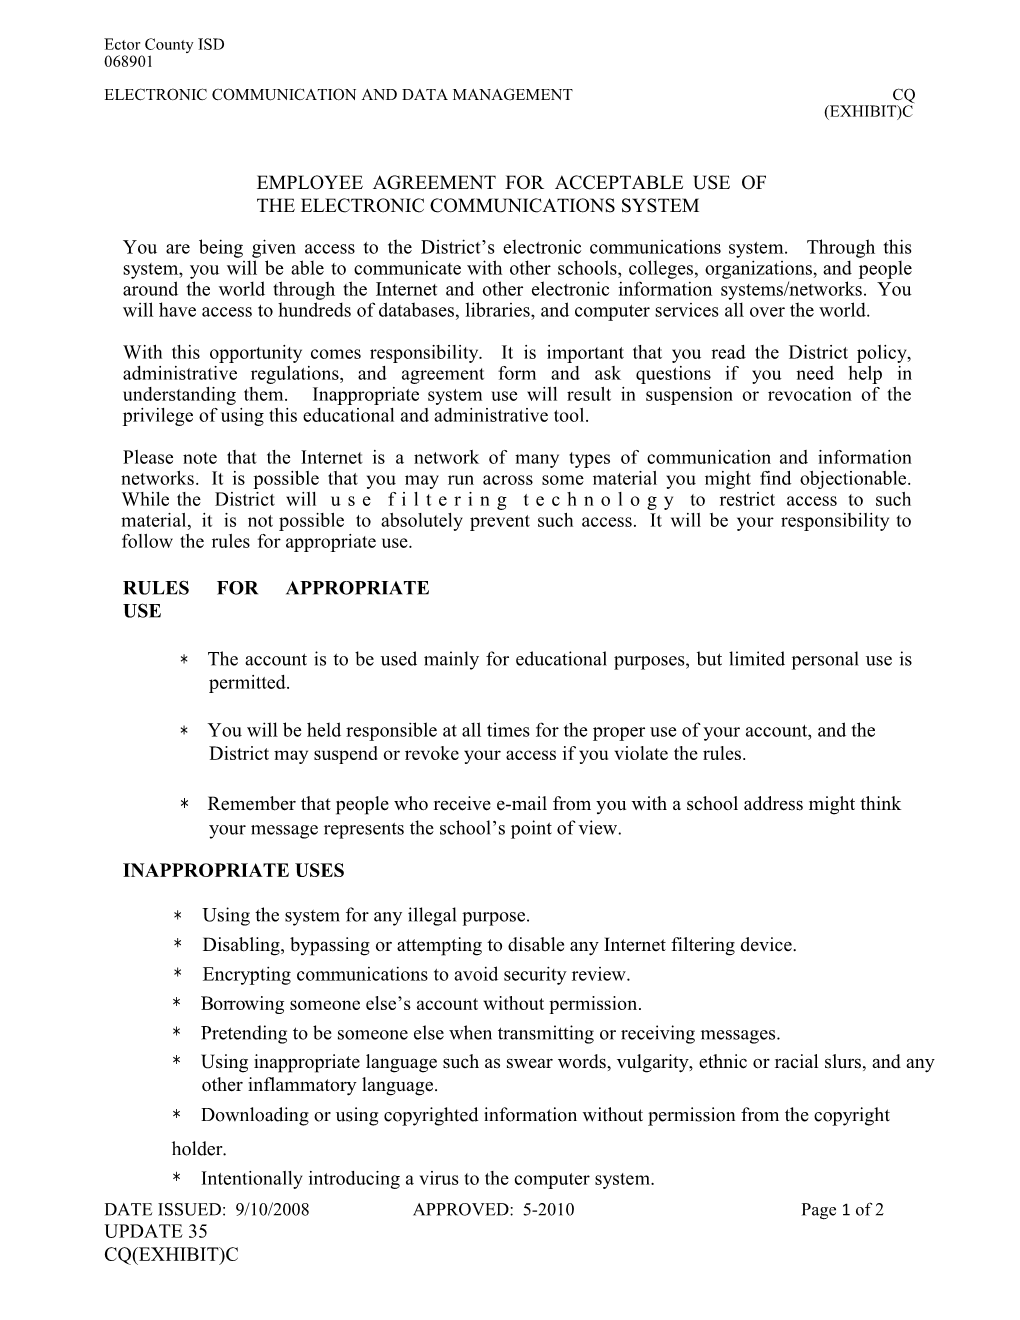 Employee Agreement for Acceptable Use of the Electronic Communications System